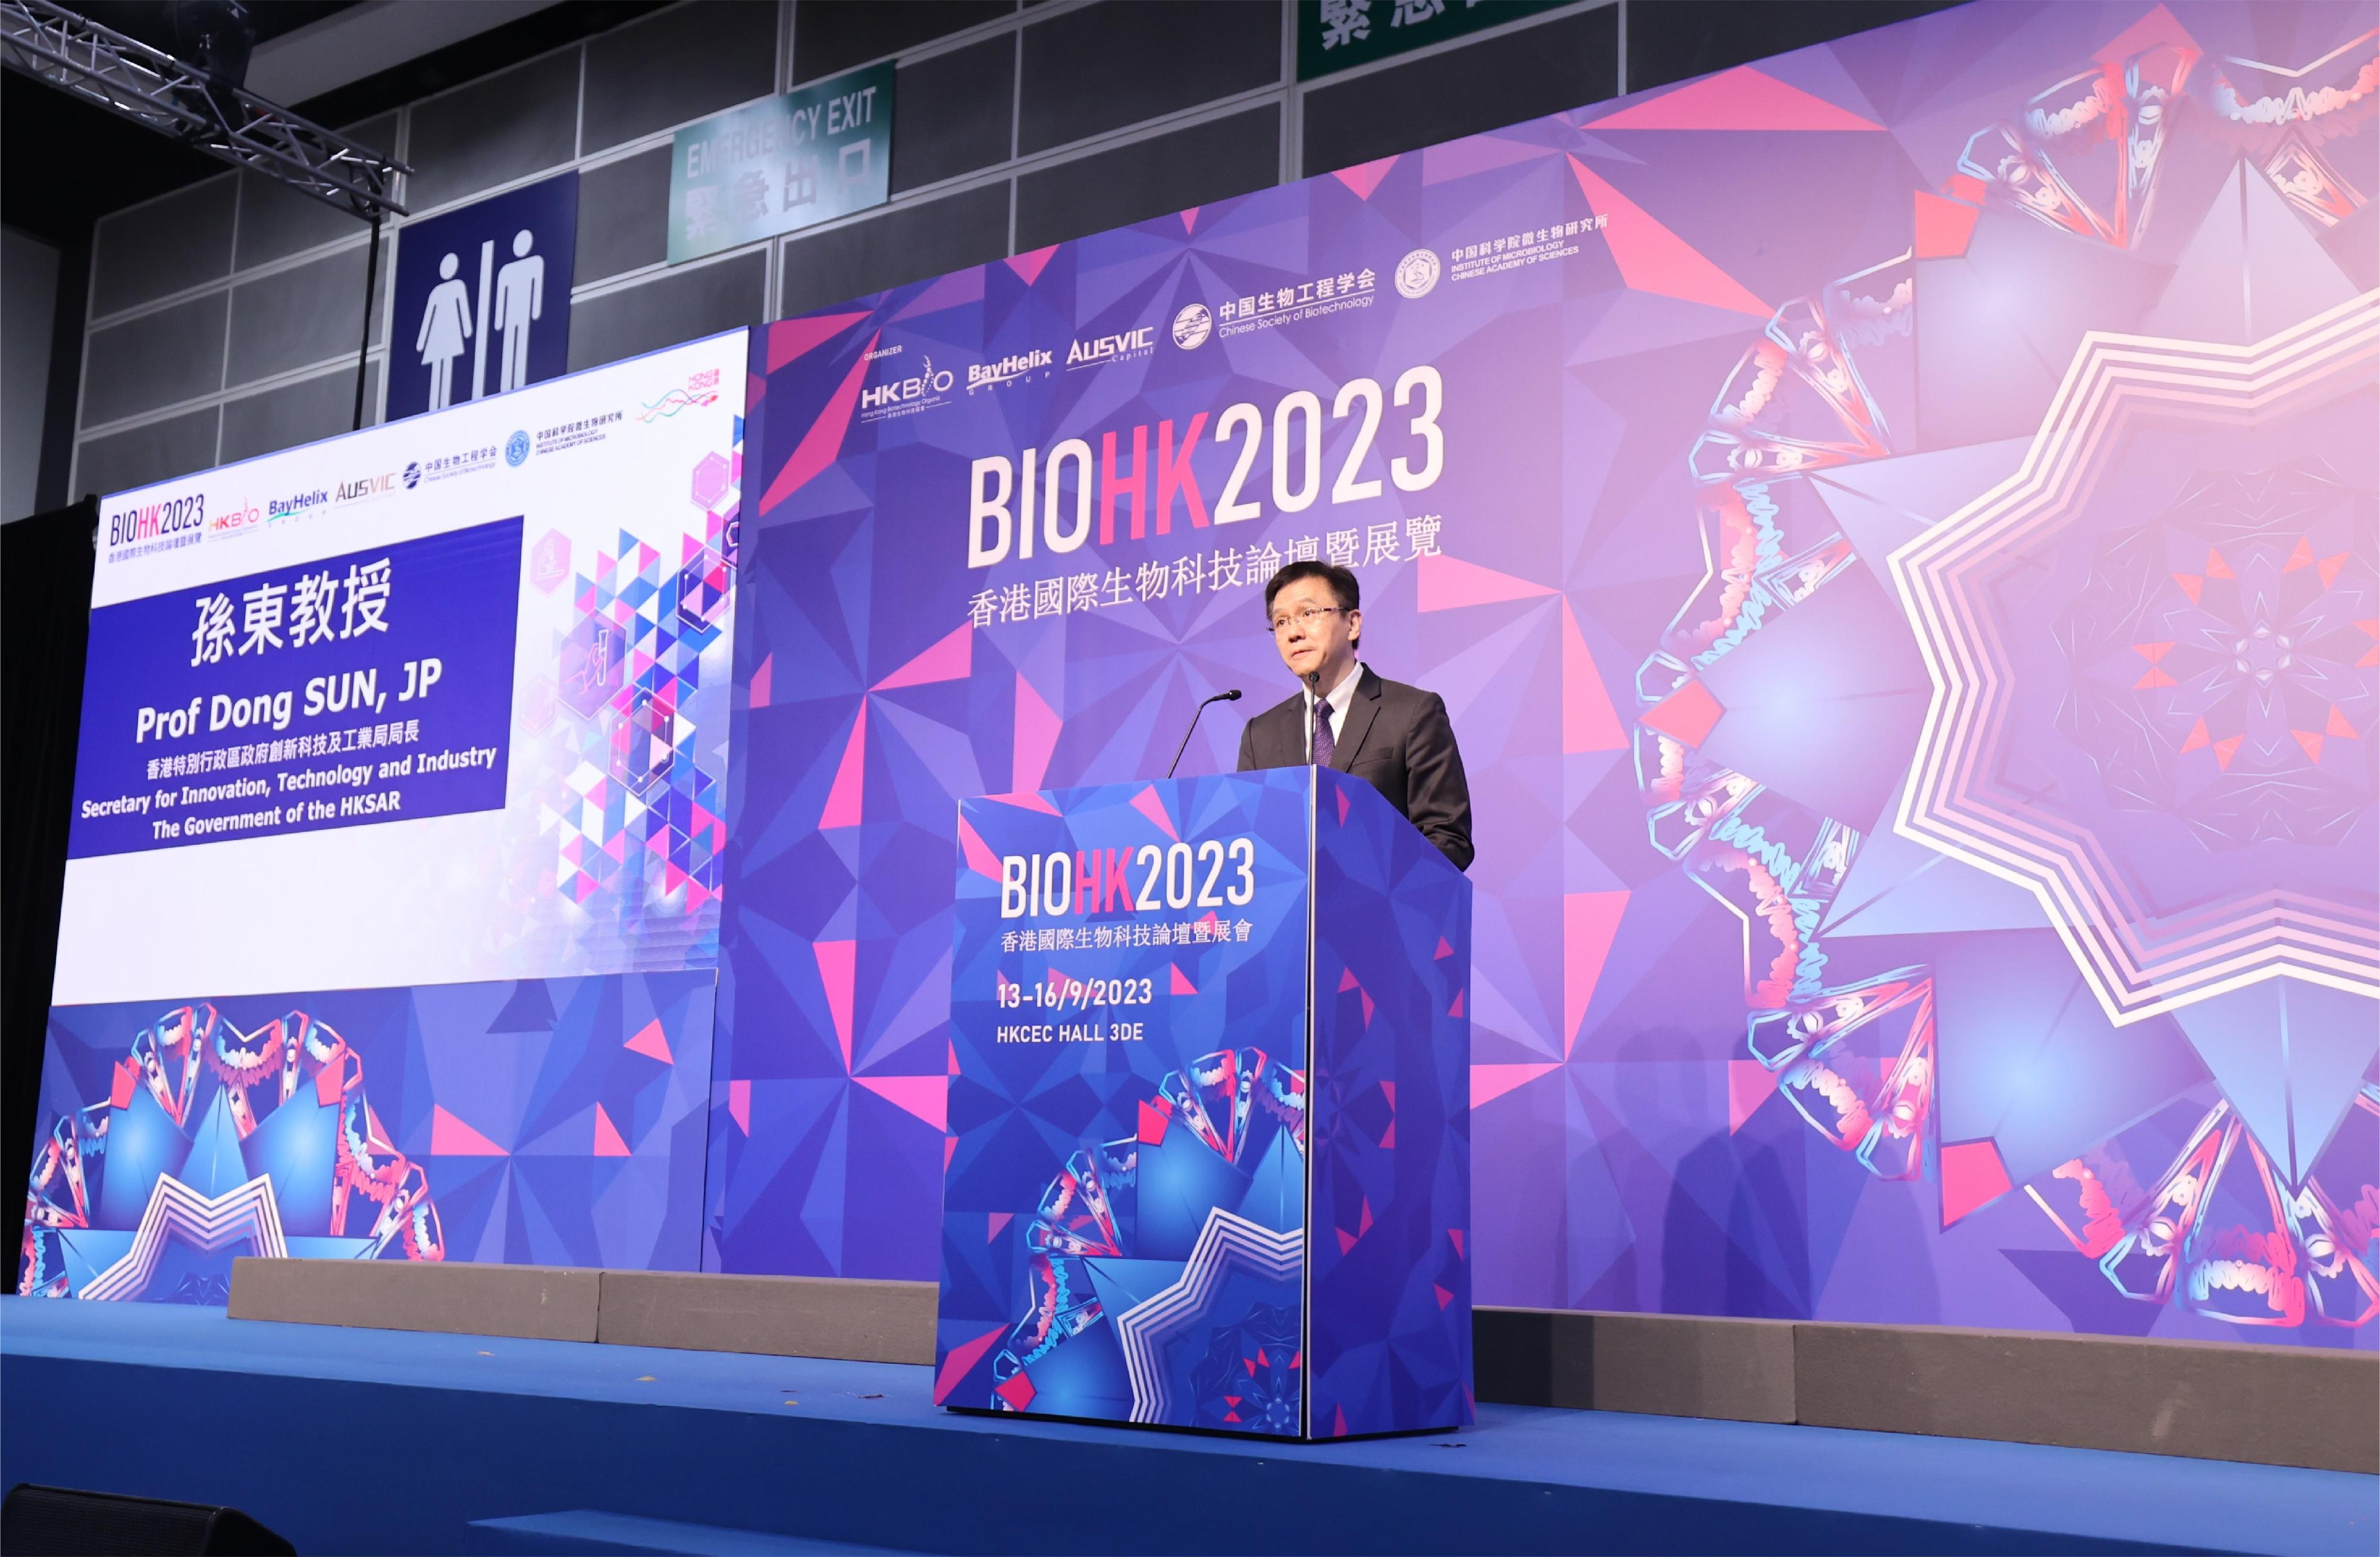 The Secretary for Innovation, Technology and Industry, Professor Sun Dong, speaks at the Opening Ceremony of BIOHK2023 today (September 13).